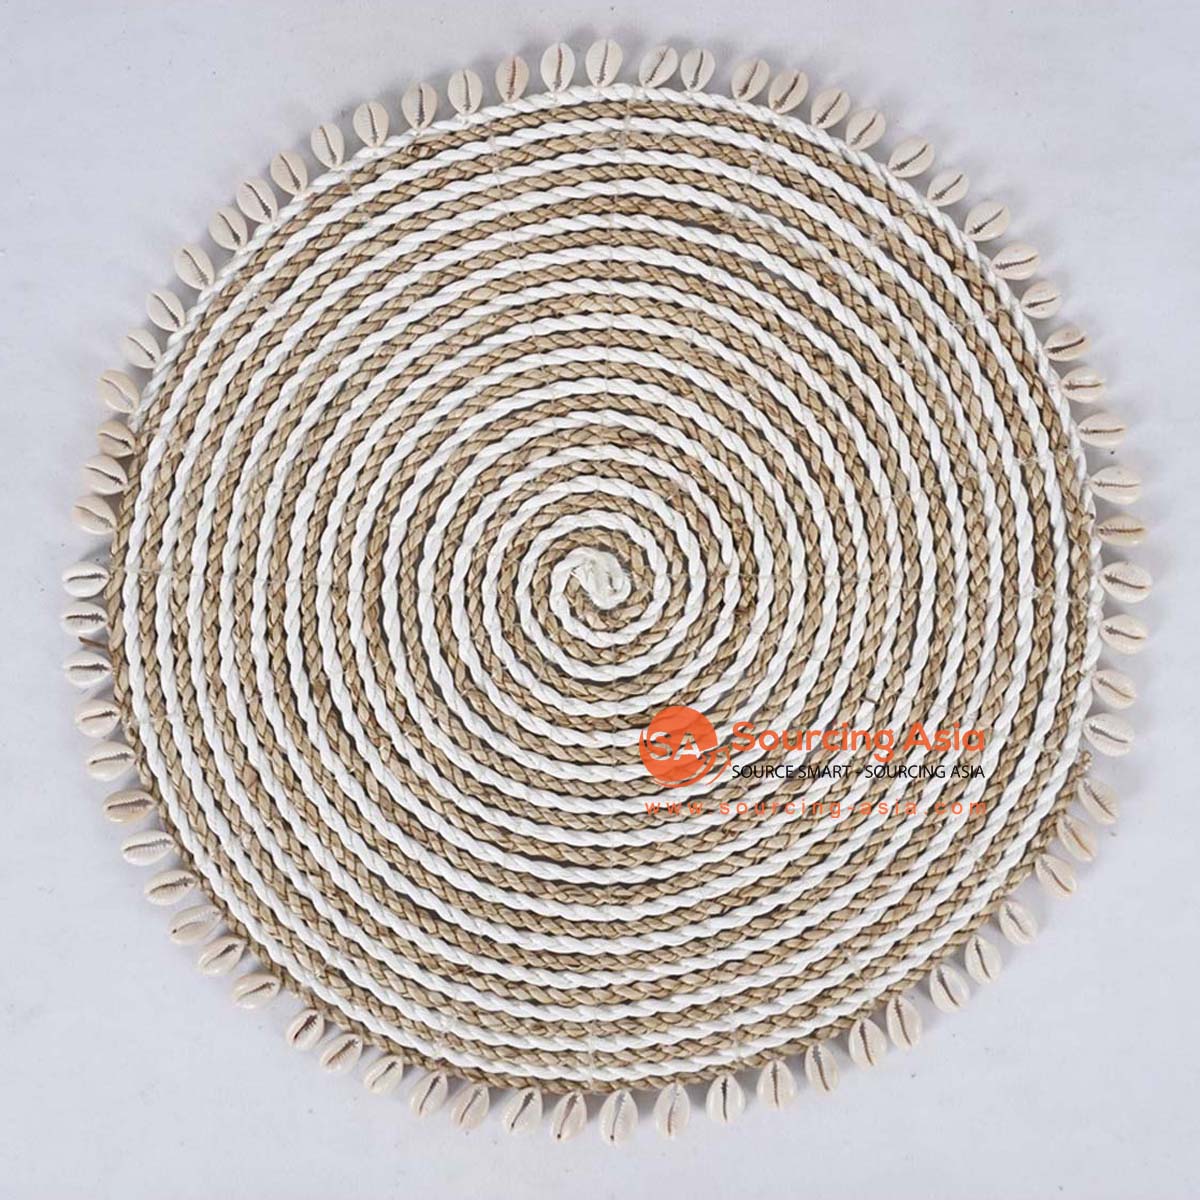 HBSC566 NATURAL AND WHITE PANDANUS ROUND PLACEMAT WITH SHELL EDGE